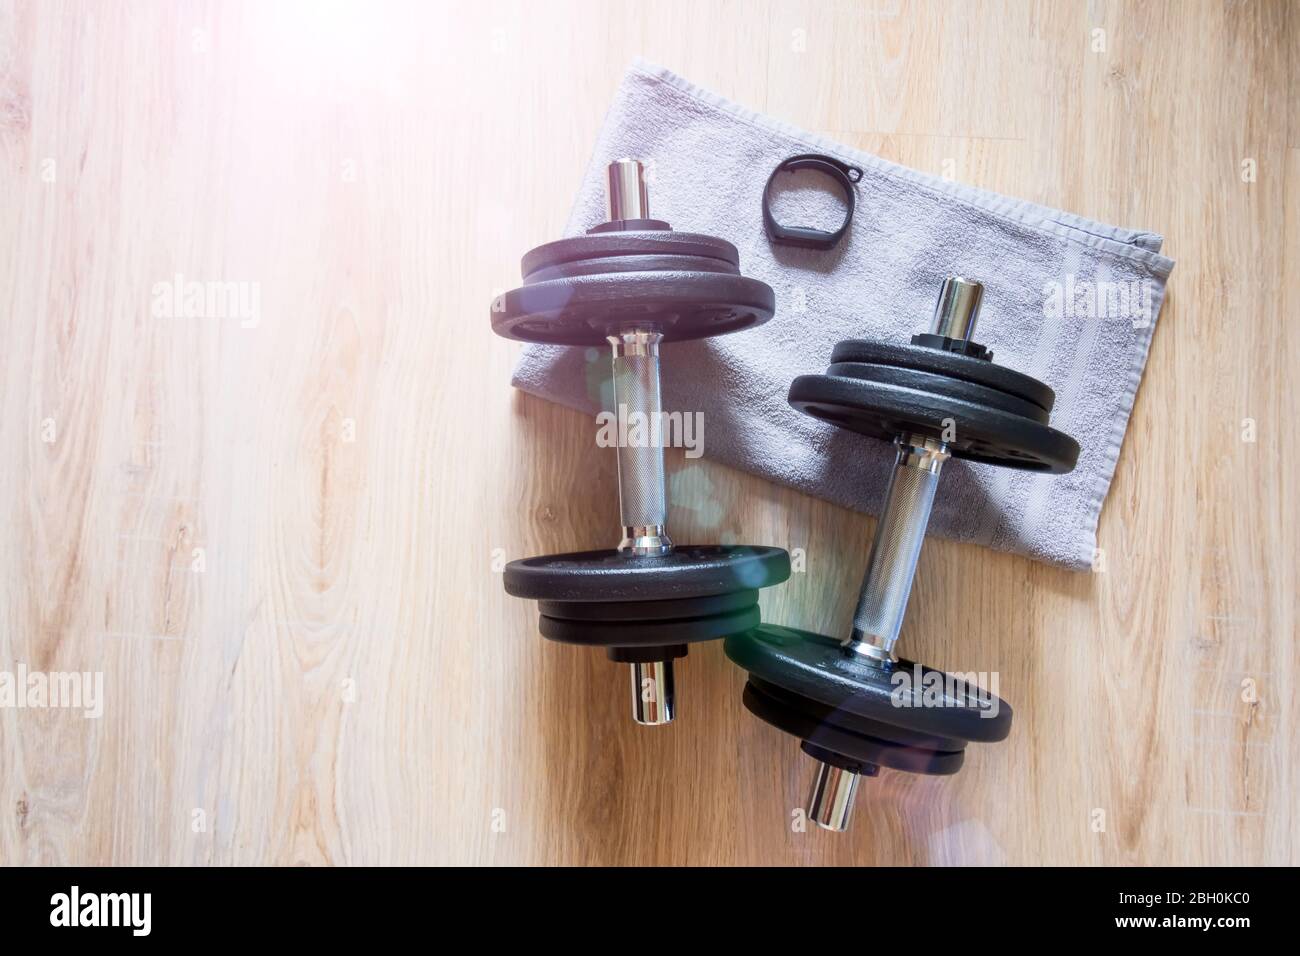 Two dumbbells and a fitness bracelet with a clock on the floor with a towel, home workout Stock Photo